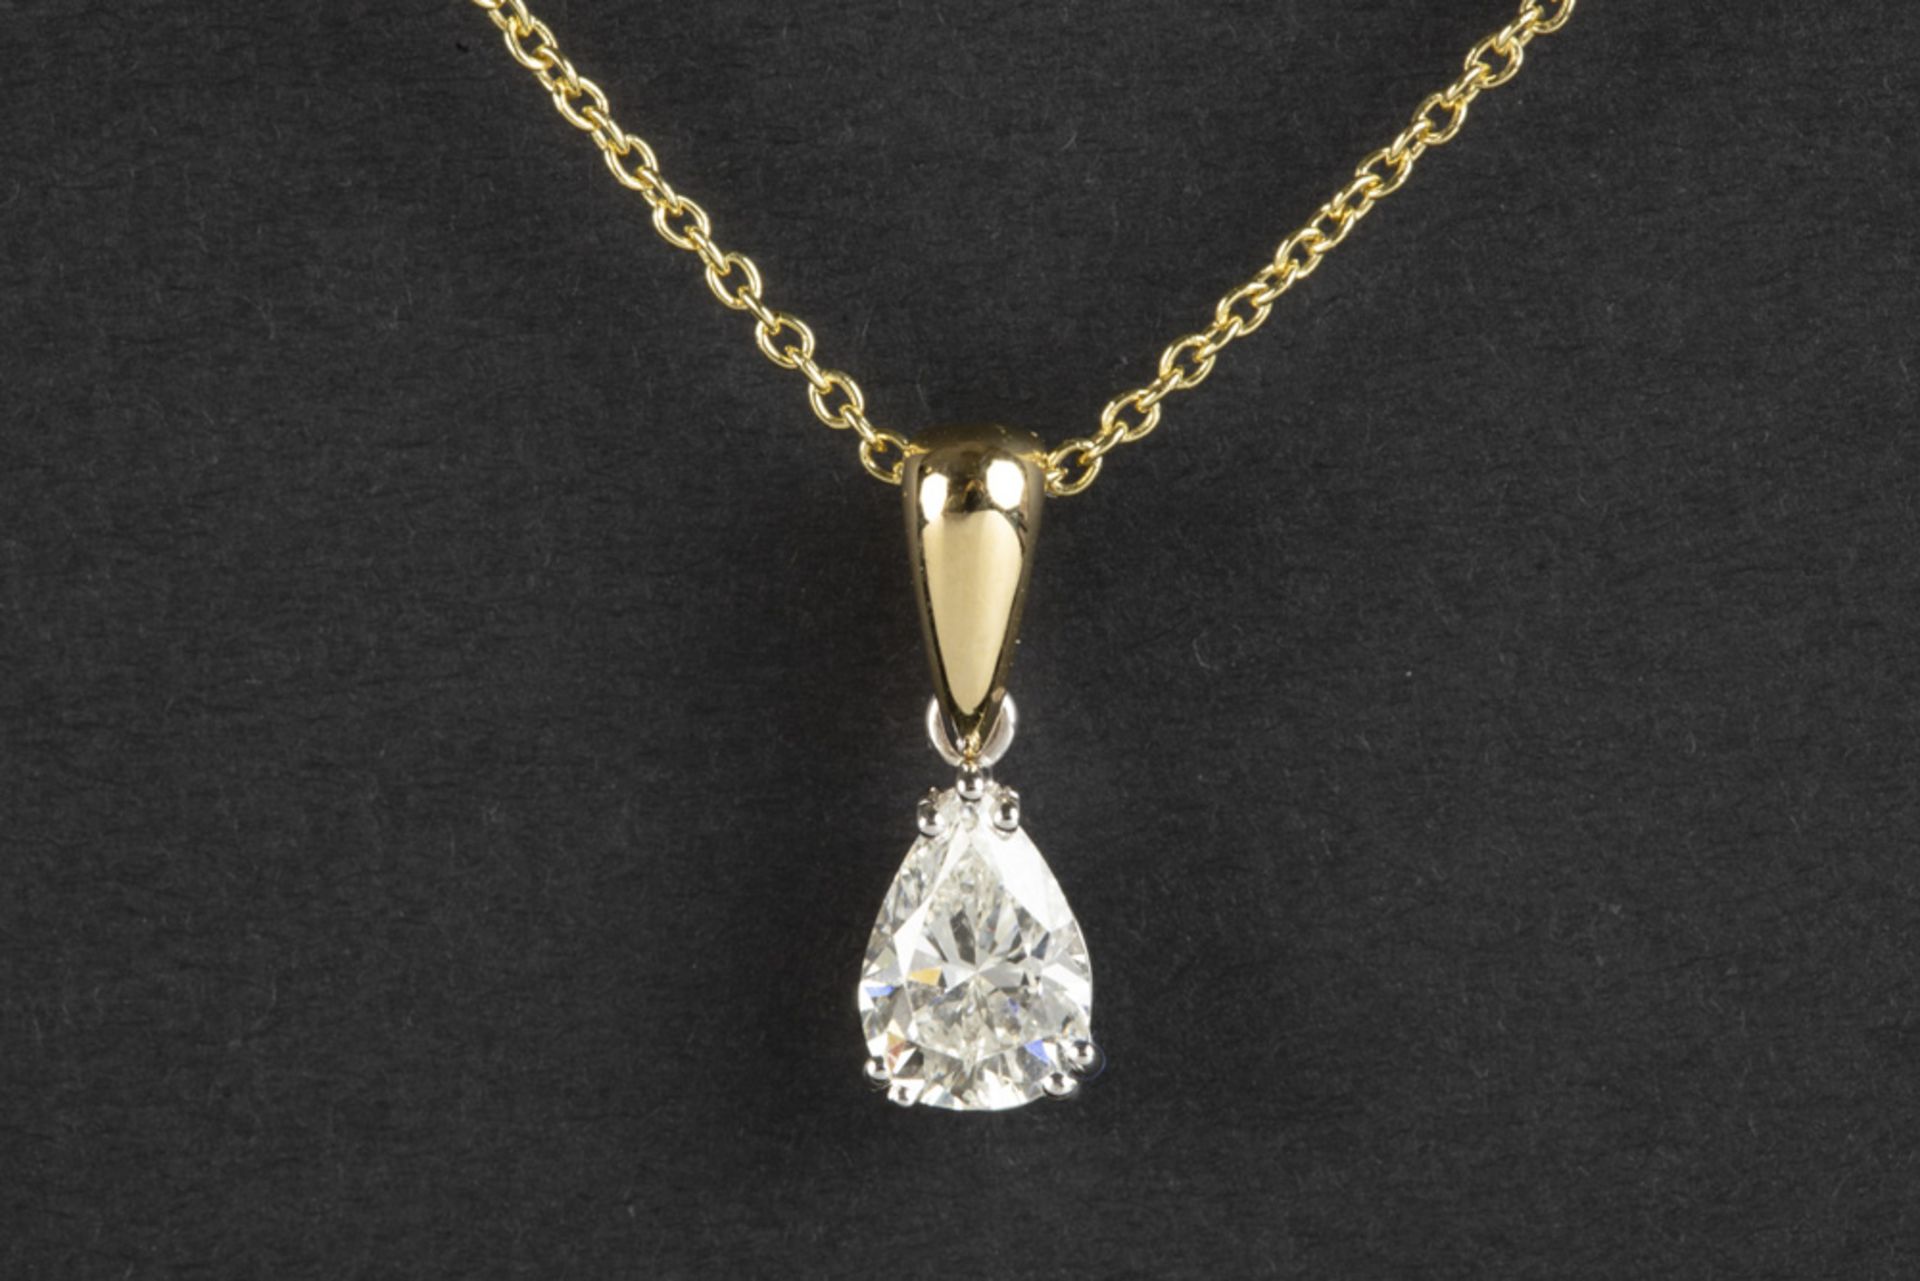 a 1,26 carat high quality oval brilliant cut diamond set in a pendant in white and yellow gold (18